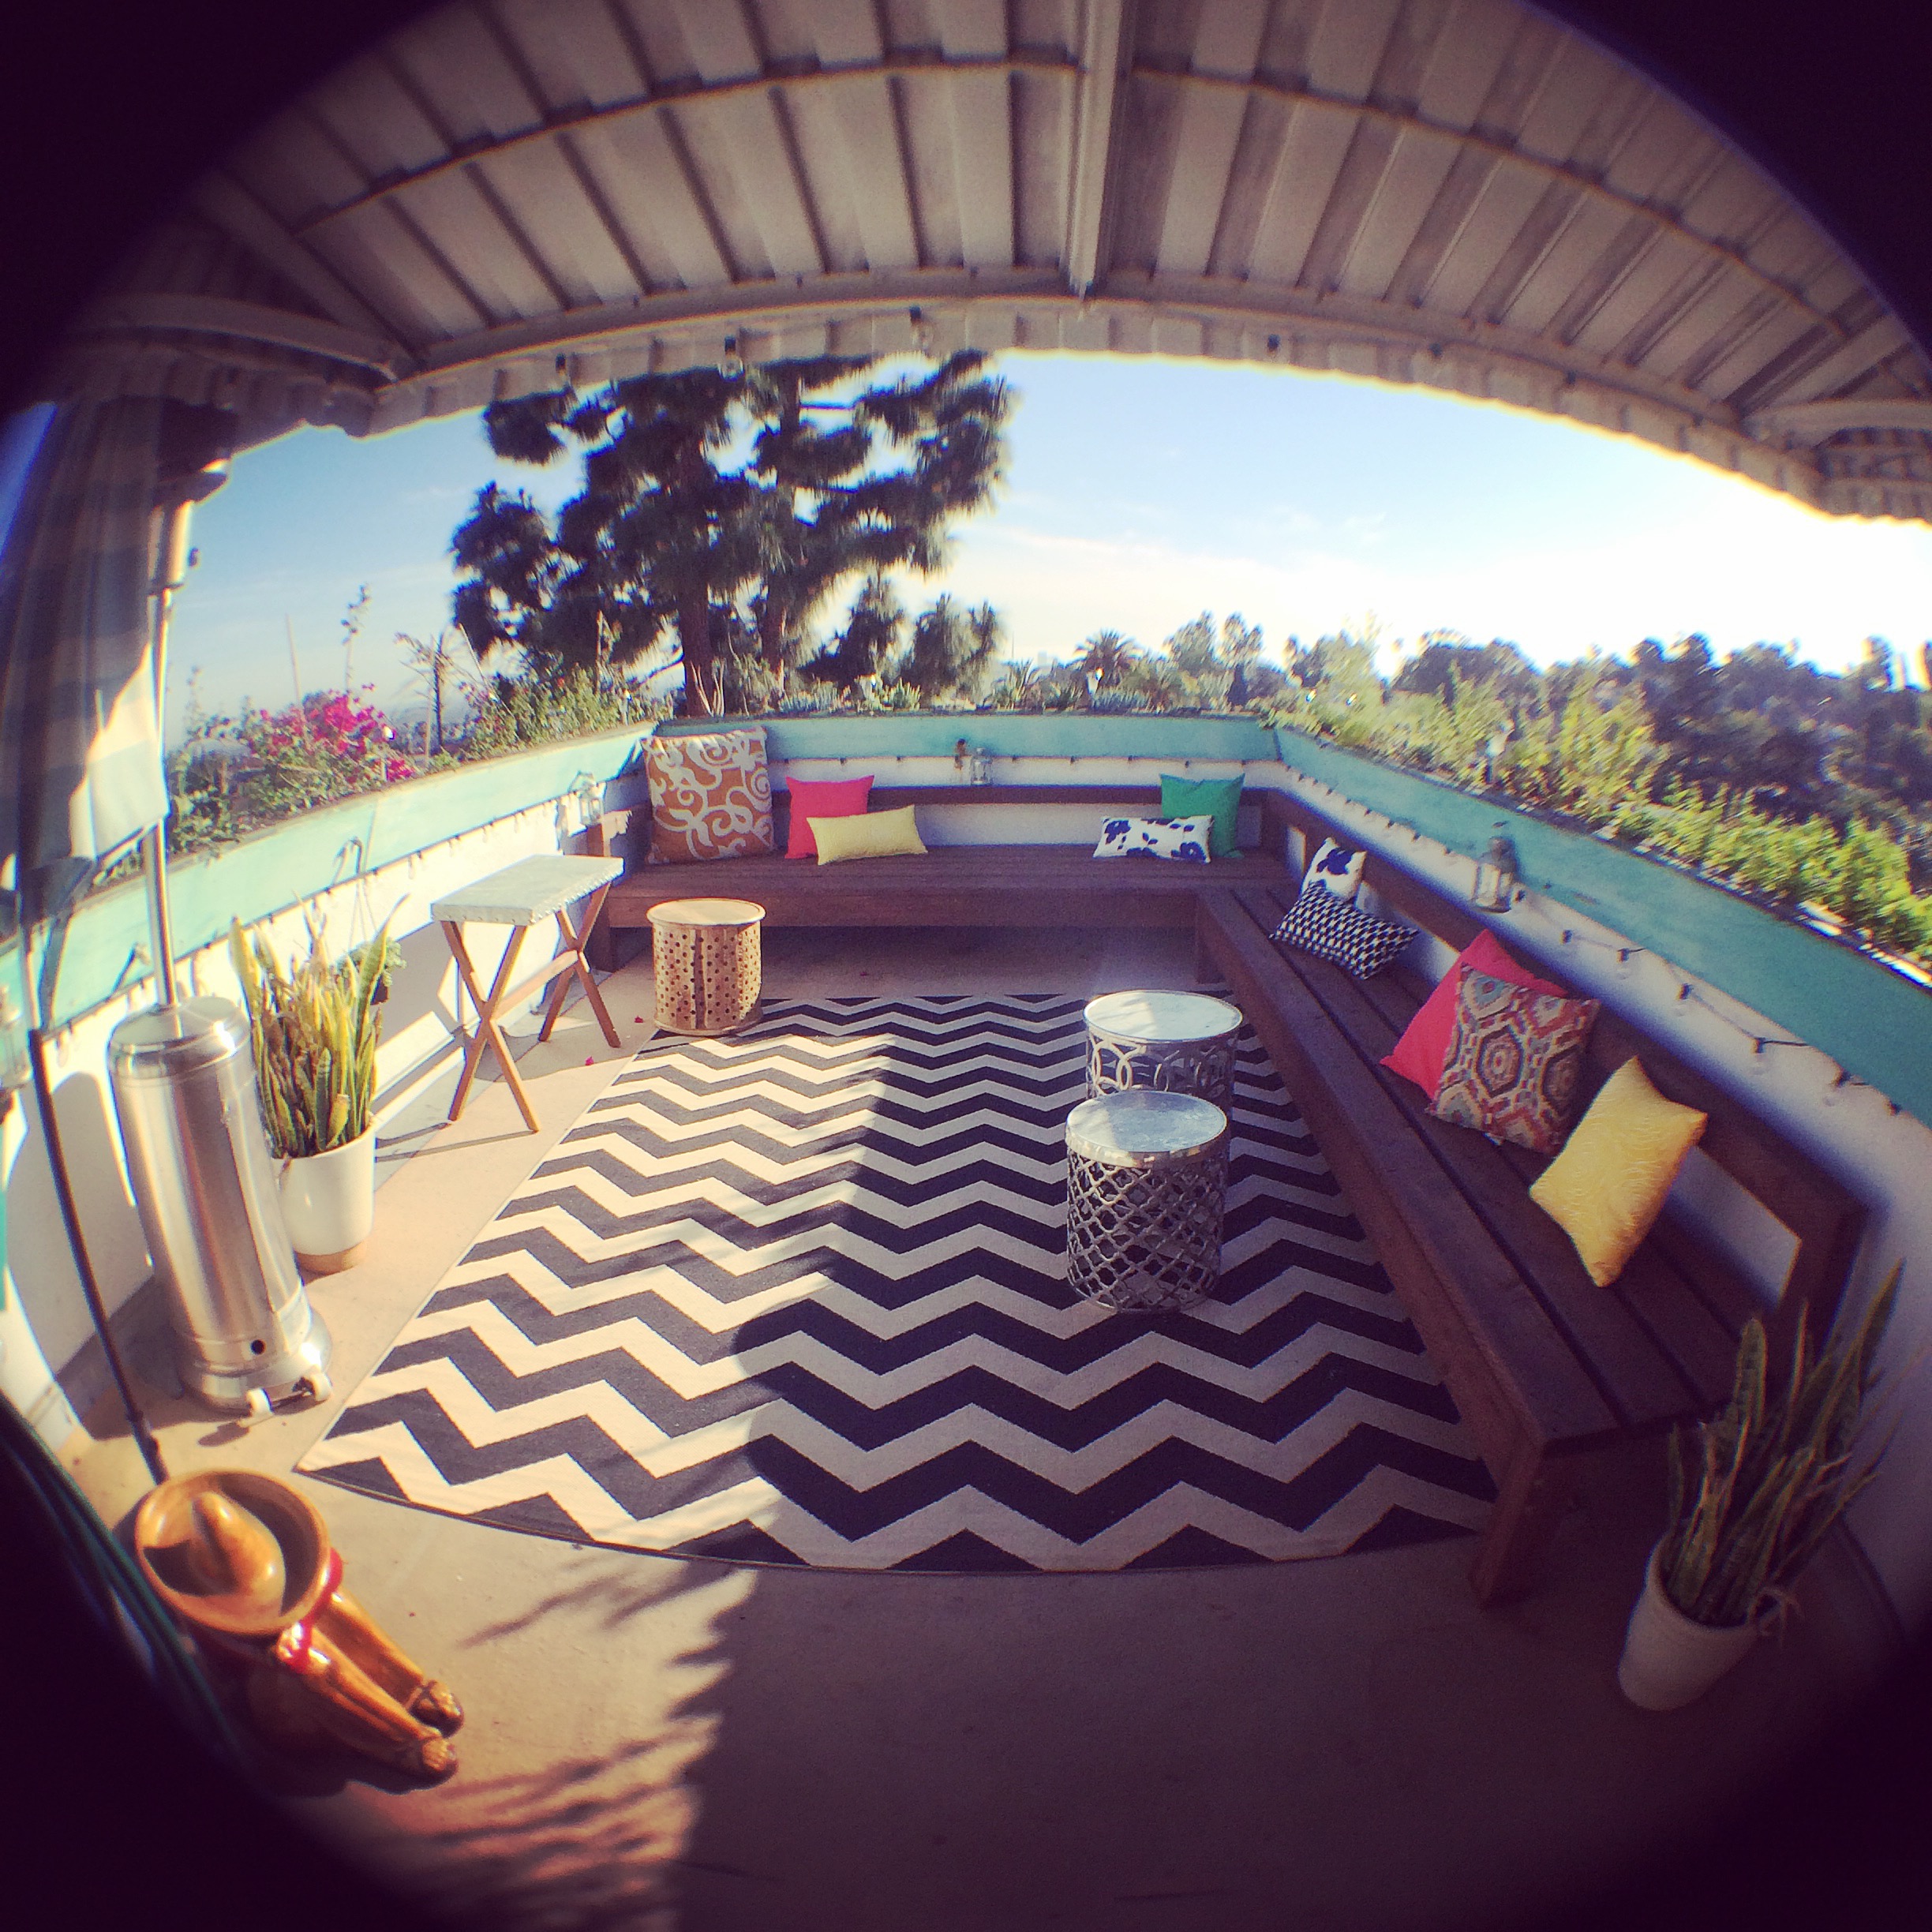  Vika's deck in Beachwood Canyon, Los Angeles. Her favorite spot to gather friends for BBQs and cocktails! 